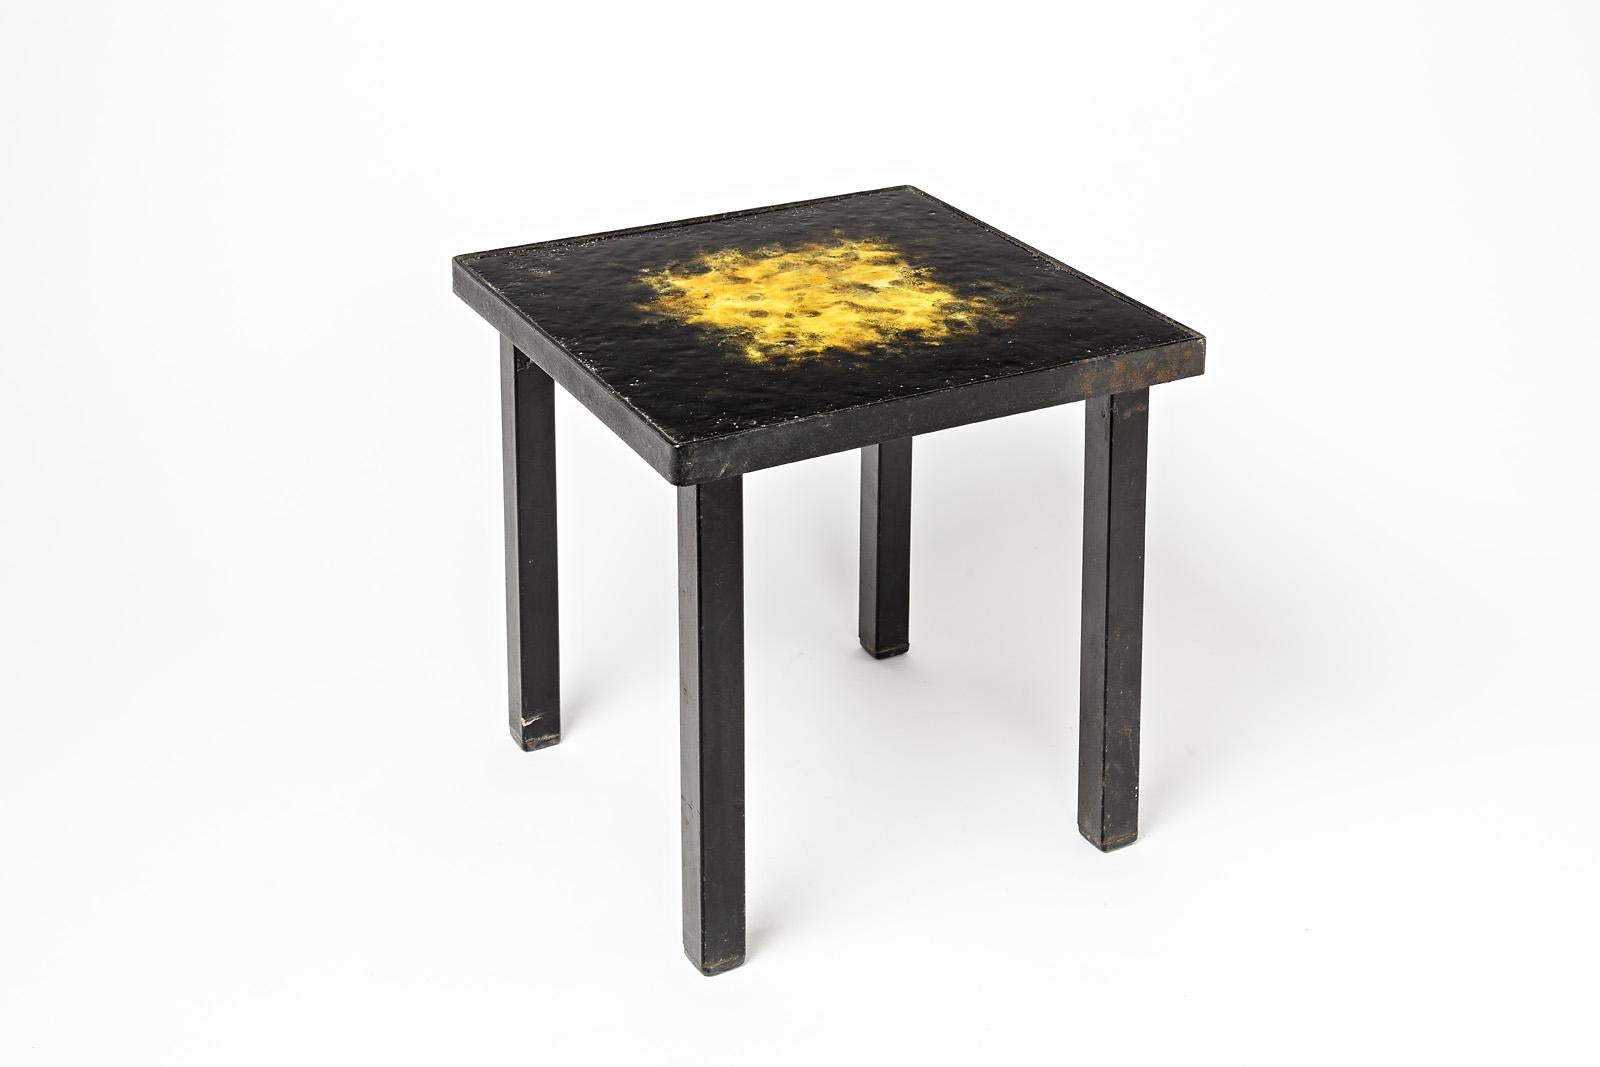 Pair of Ceramic Low Coffee Tables Shinny Black and Yellow, circa 1970 For Sale 1